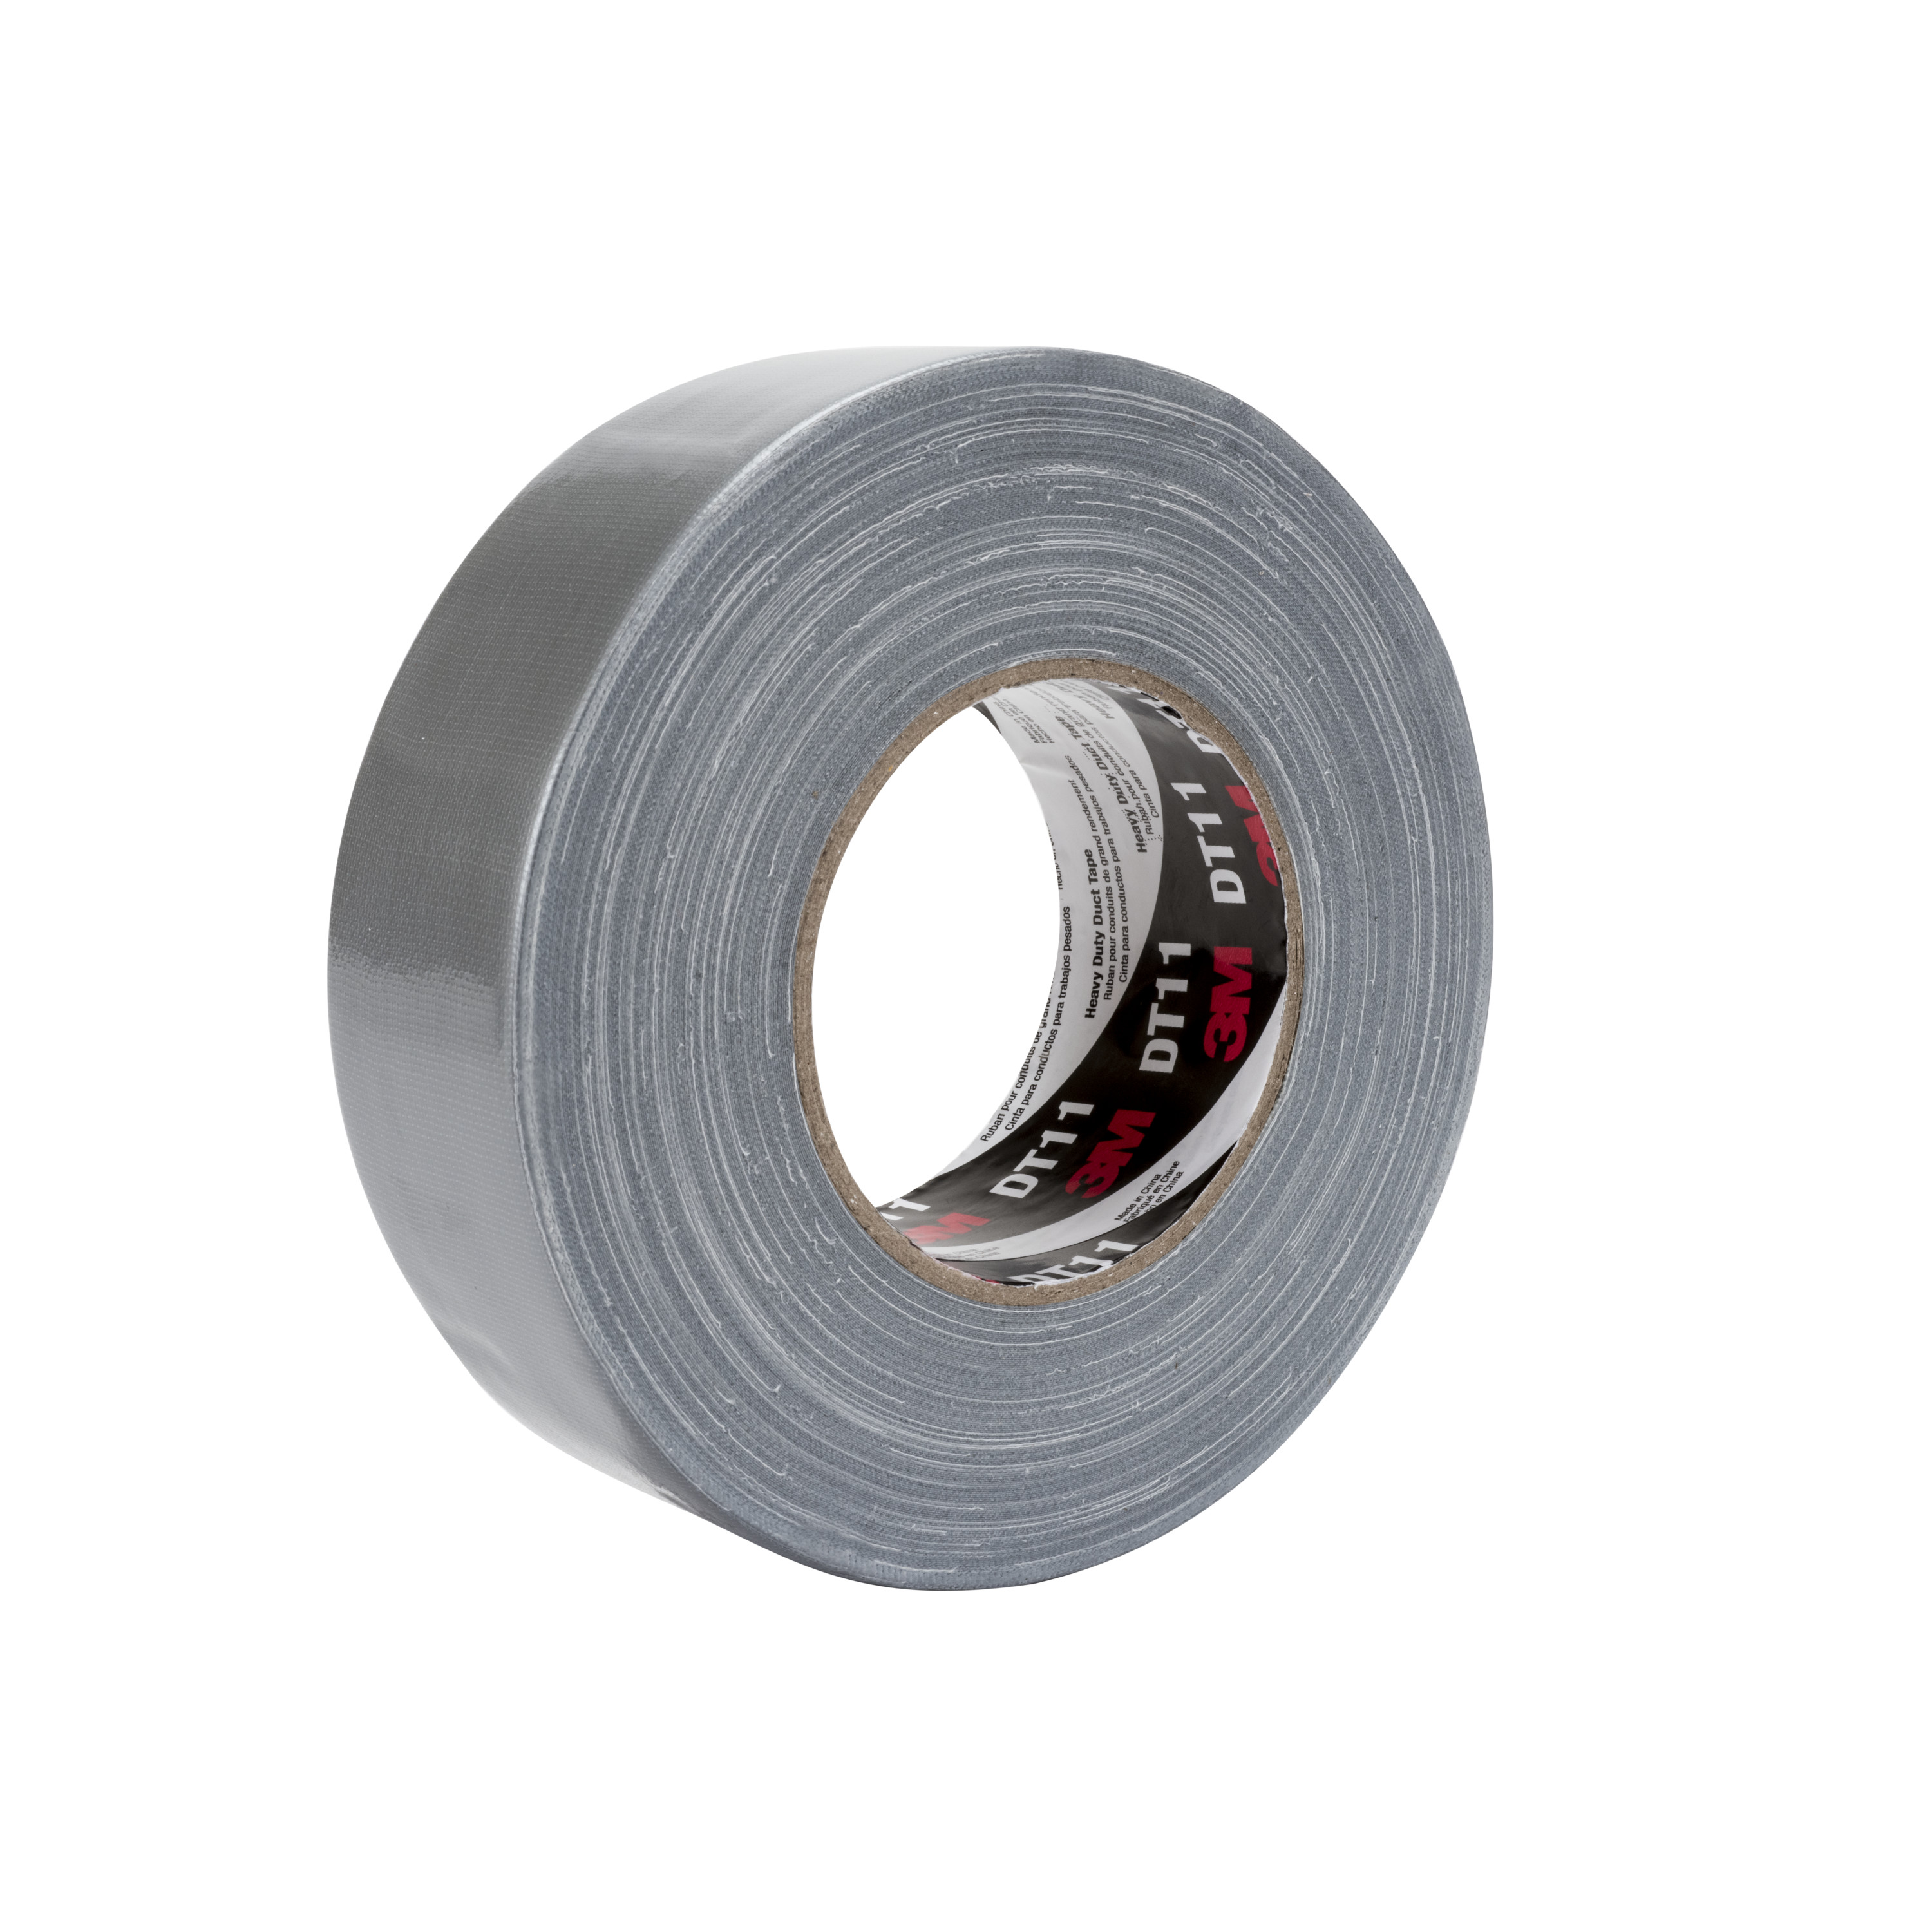 3M™ Heavy Duty Duct Tape DT11, Silver, 48 mm x 54.8 m, 11 mil, 24 per
case, Individually Wrapped Conveniently Packaged